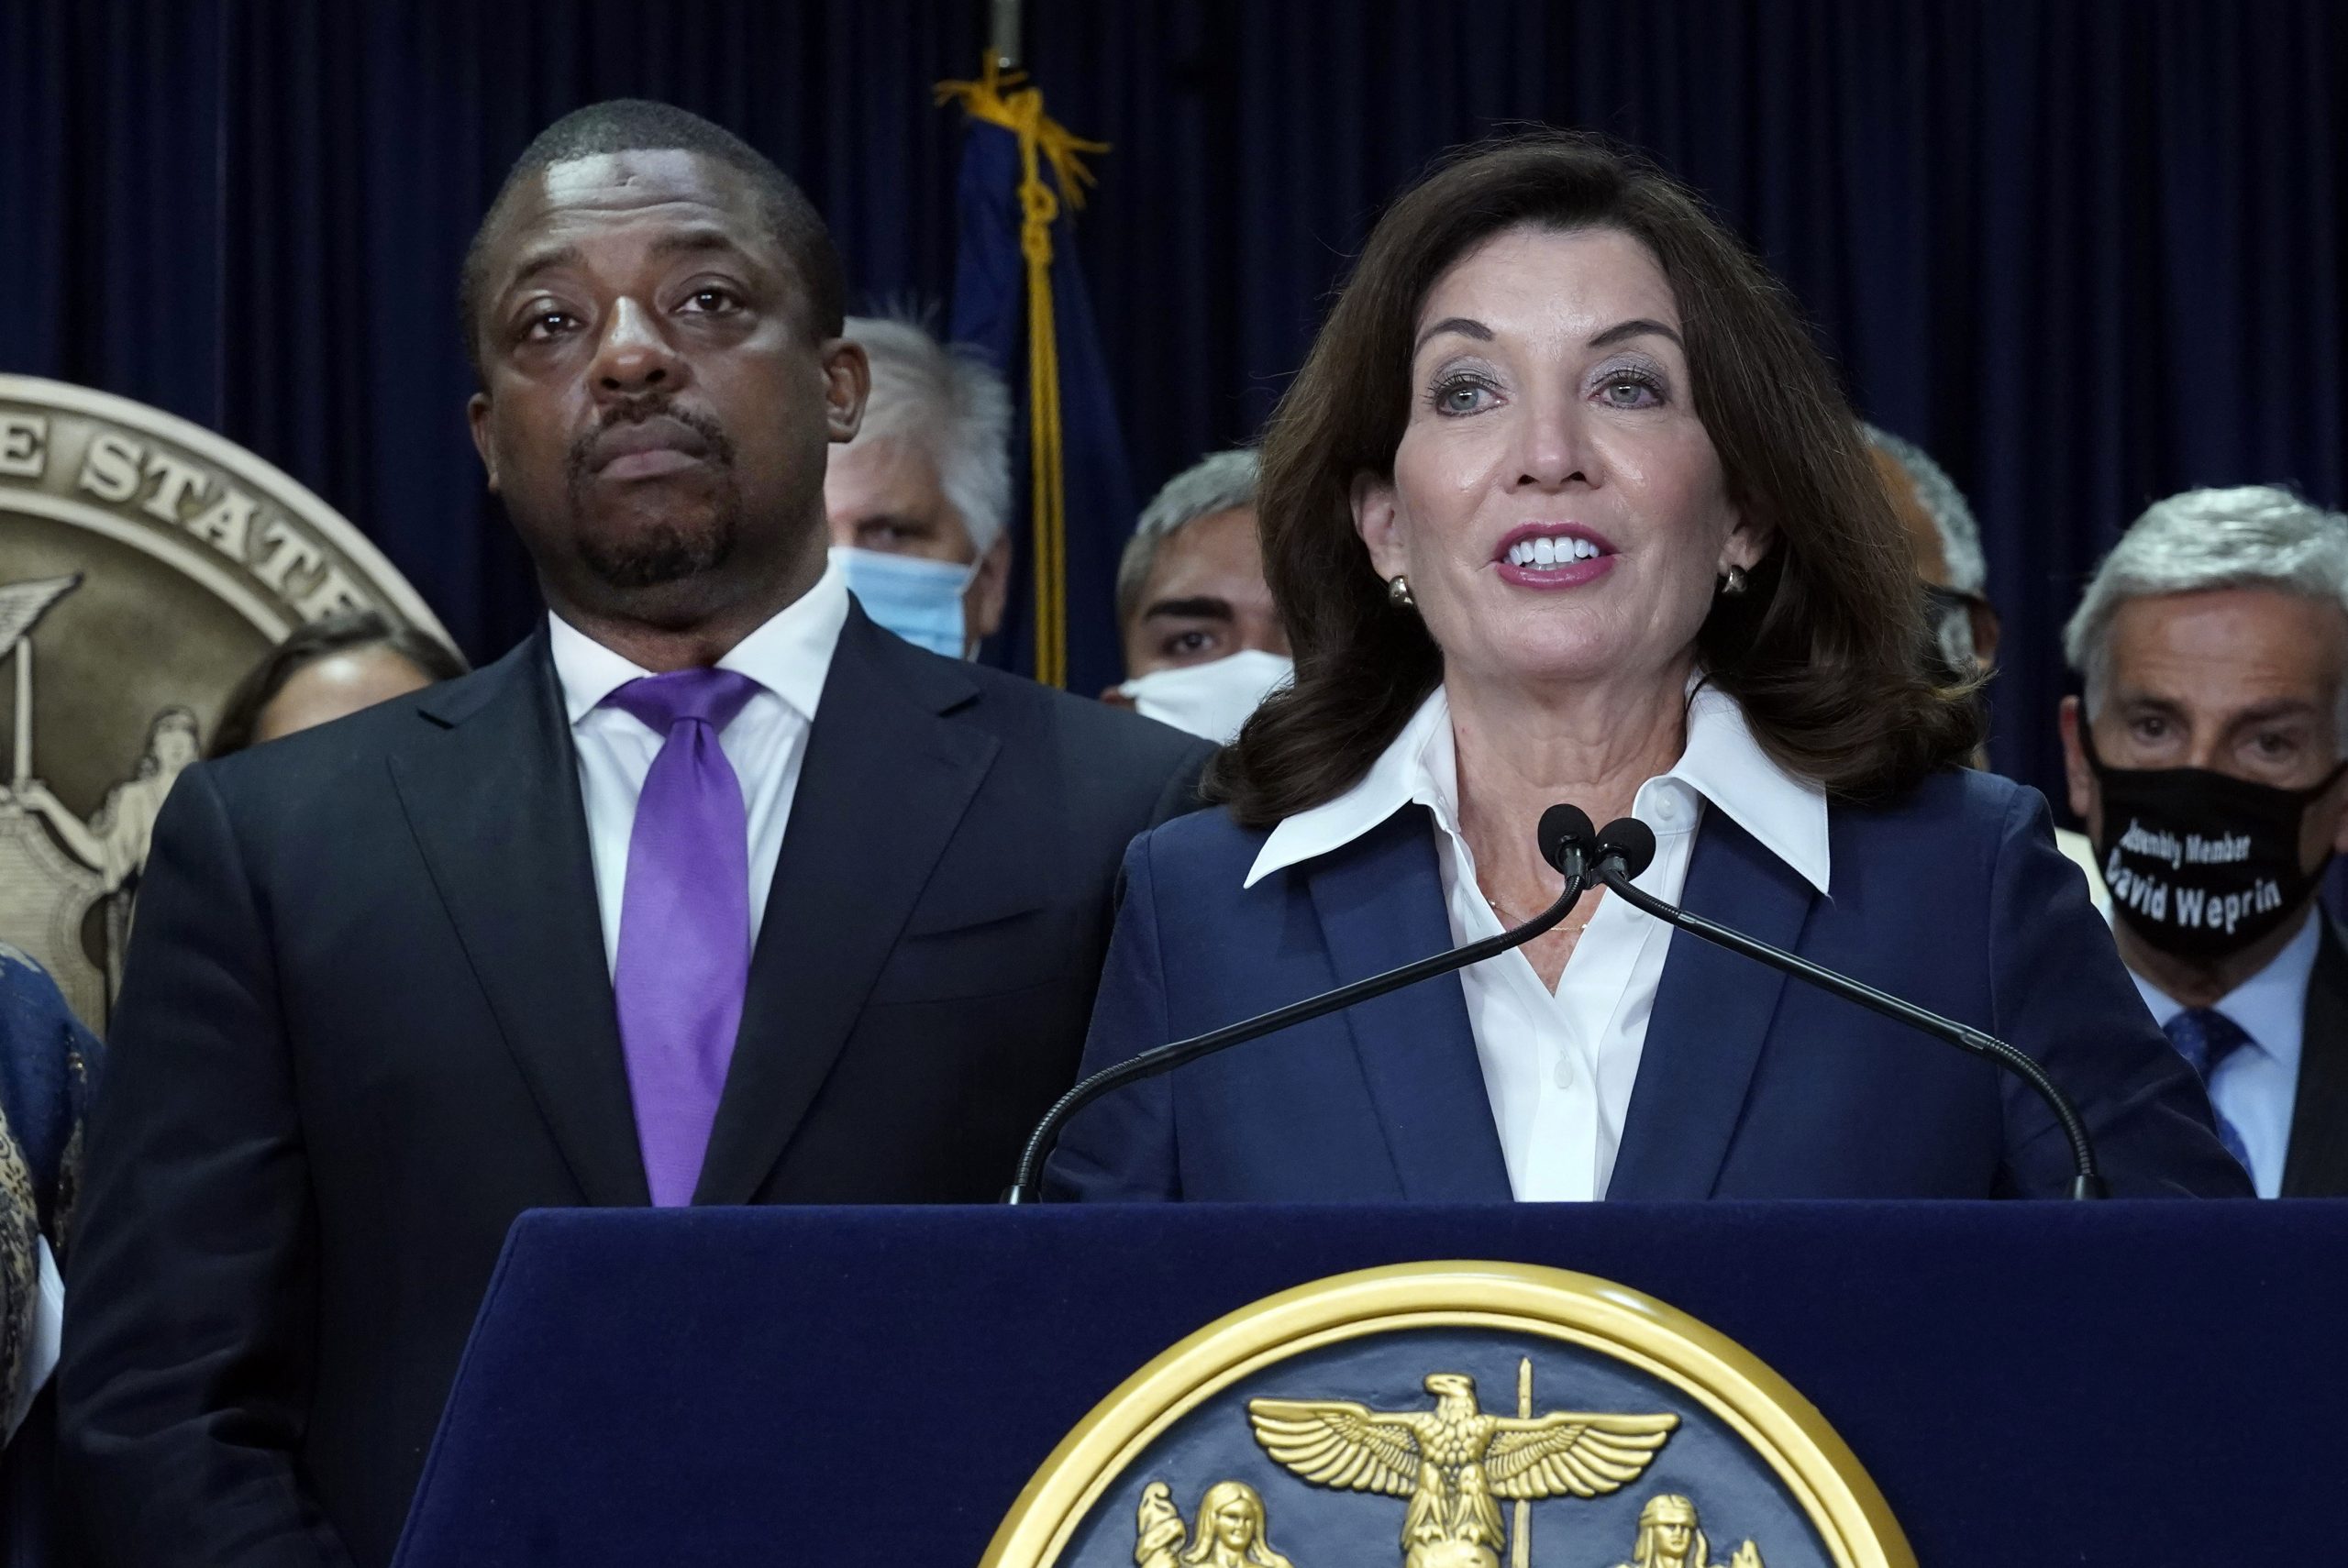 Hochul considering ‘a lot of people’ to replace LG; says she was unaware of his troubles